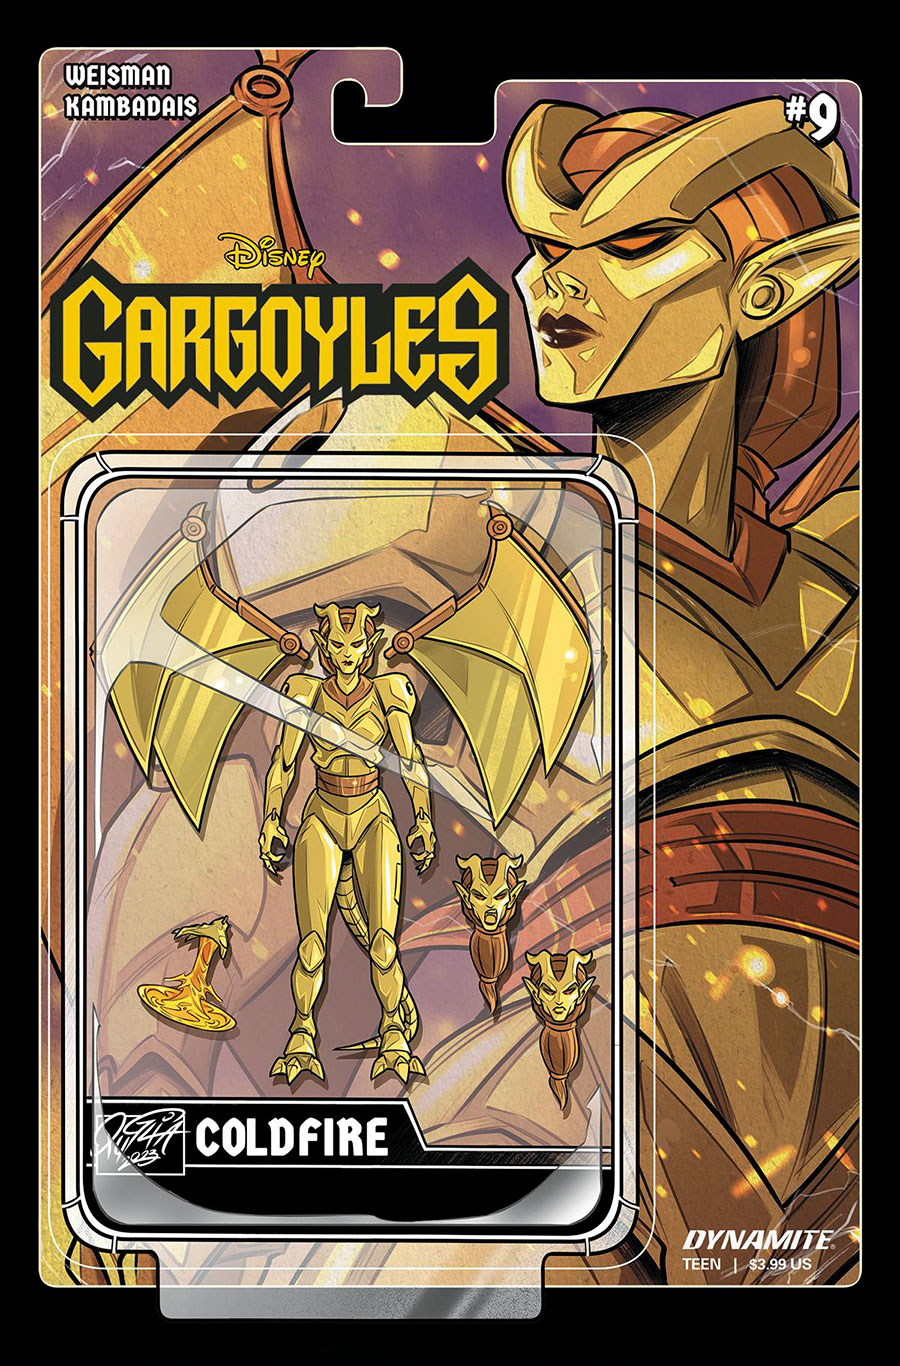 Gargoyles Vol 3 #9 Cover F Variant Action Figure Cover